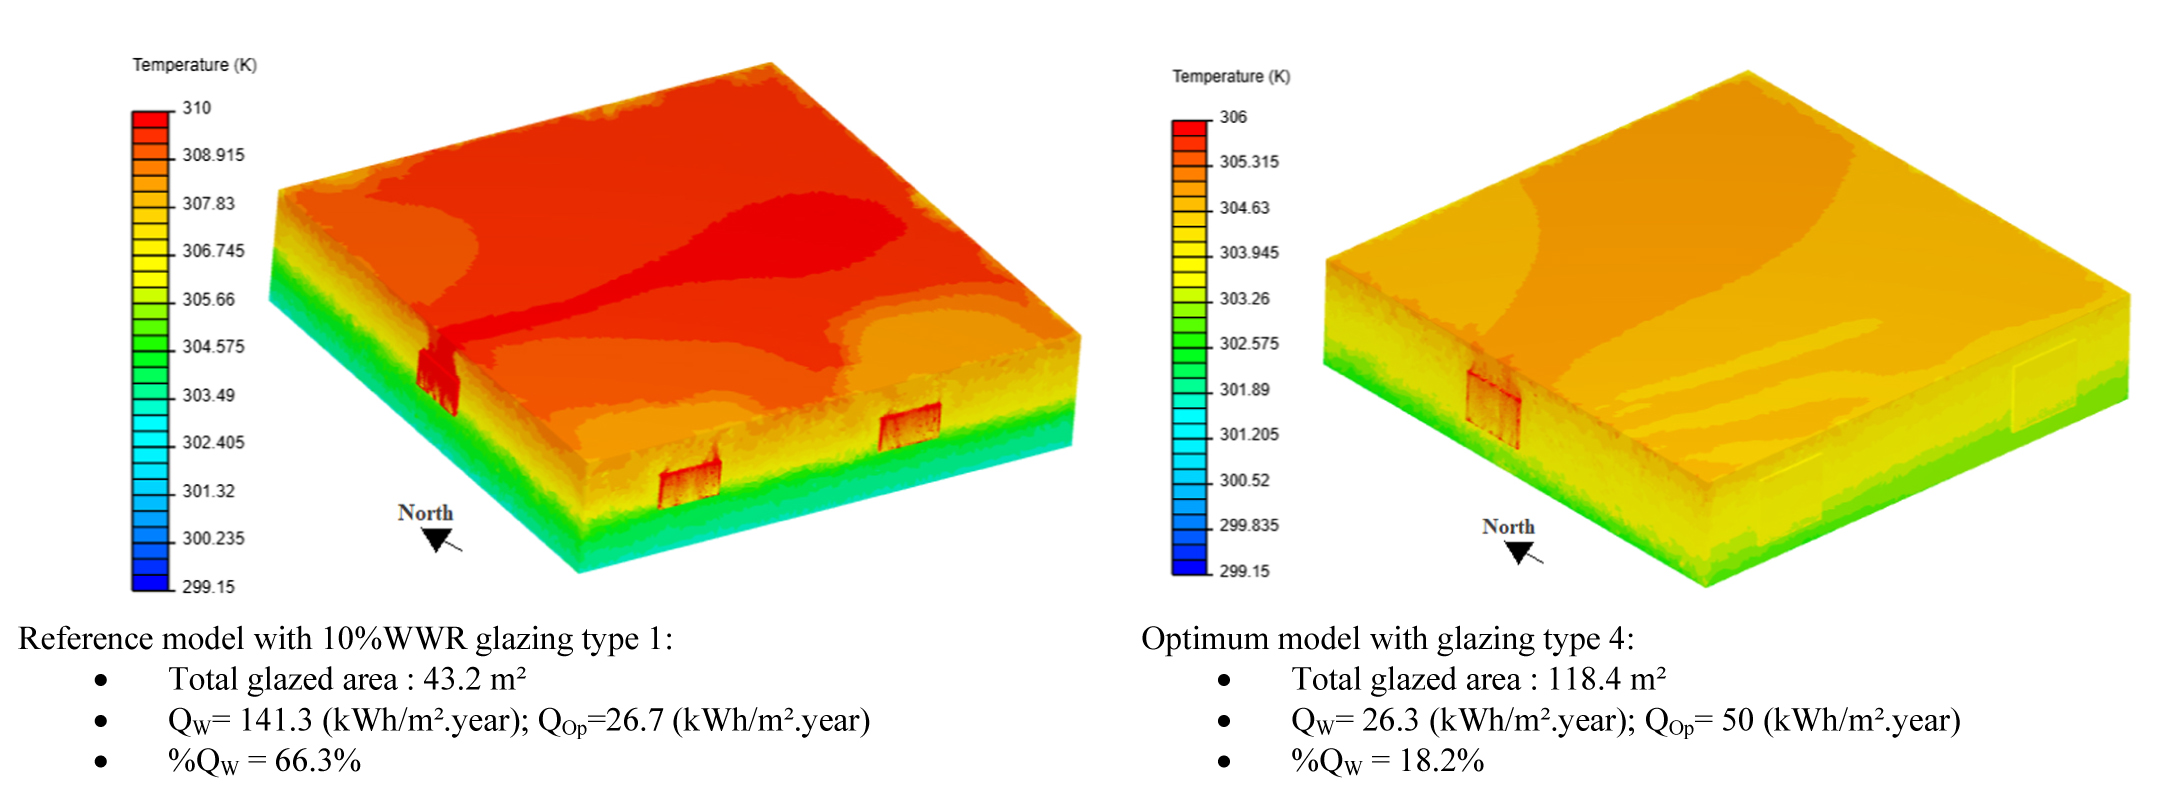 Convective heat transfer simulation for the tow building models at 3 p.m.